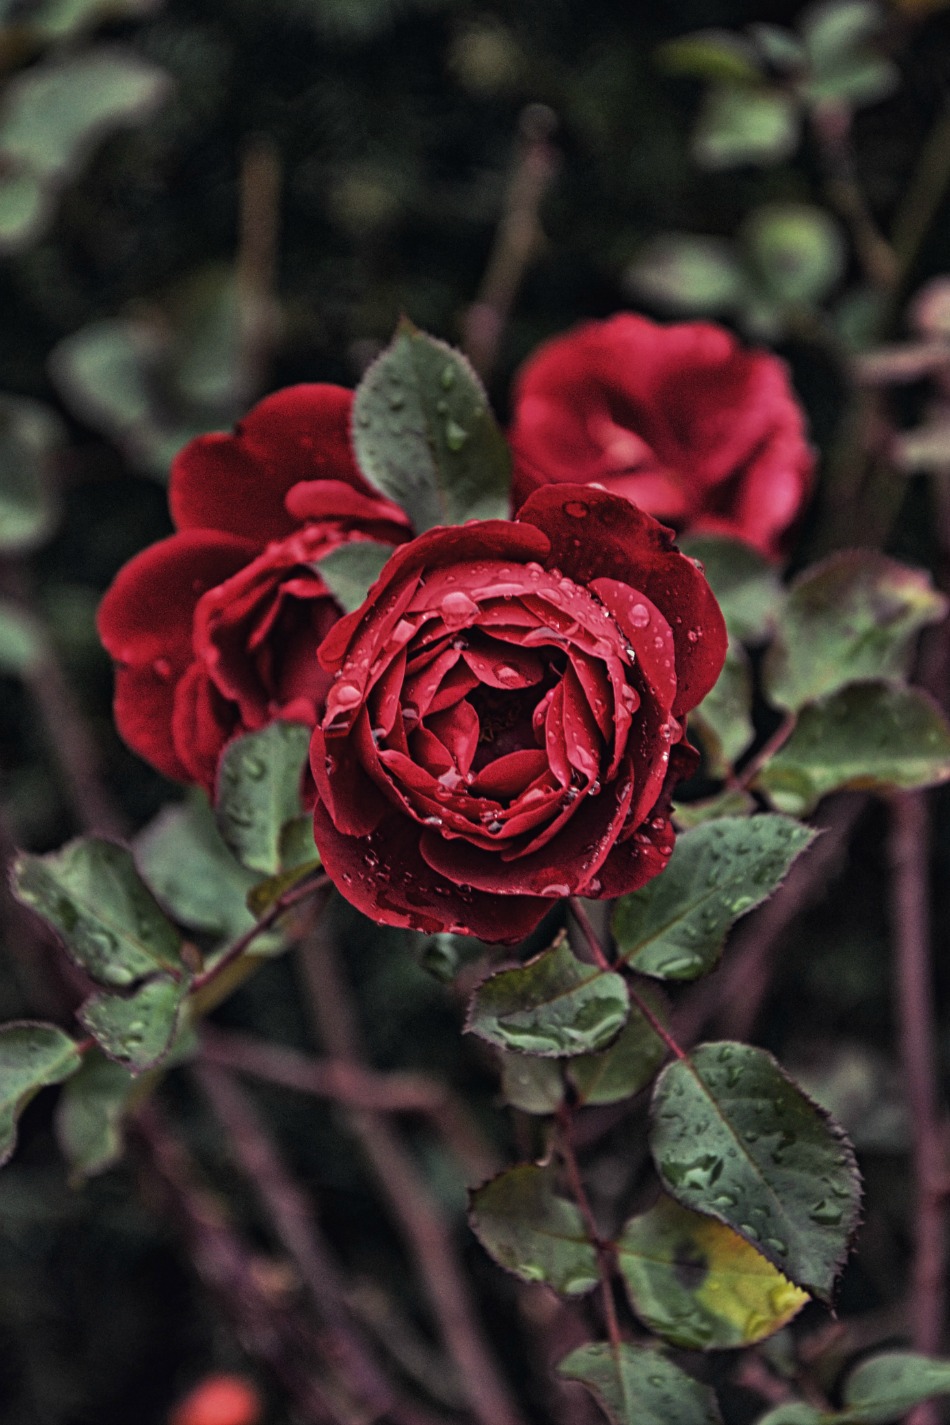 5 Interesting Things You Didn’t Know About Rose Petals | Growing Up Herbal | Do you know these 5 interesting things about rose petals? Plus, some ways to use them in herbal remedies as well!